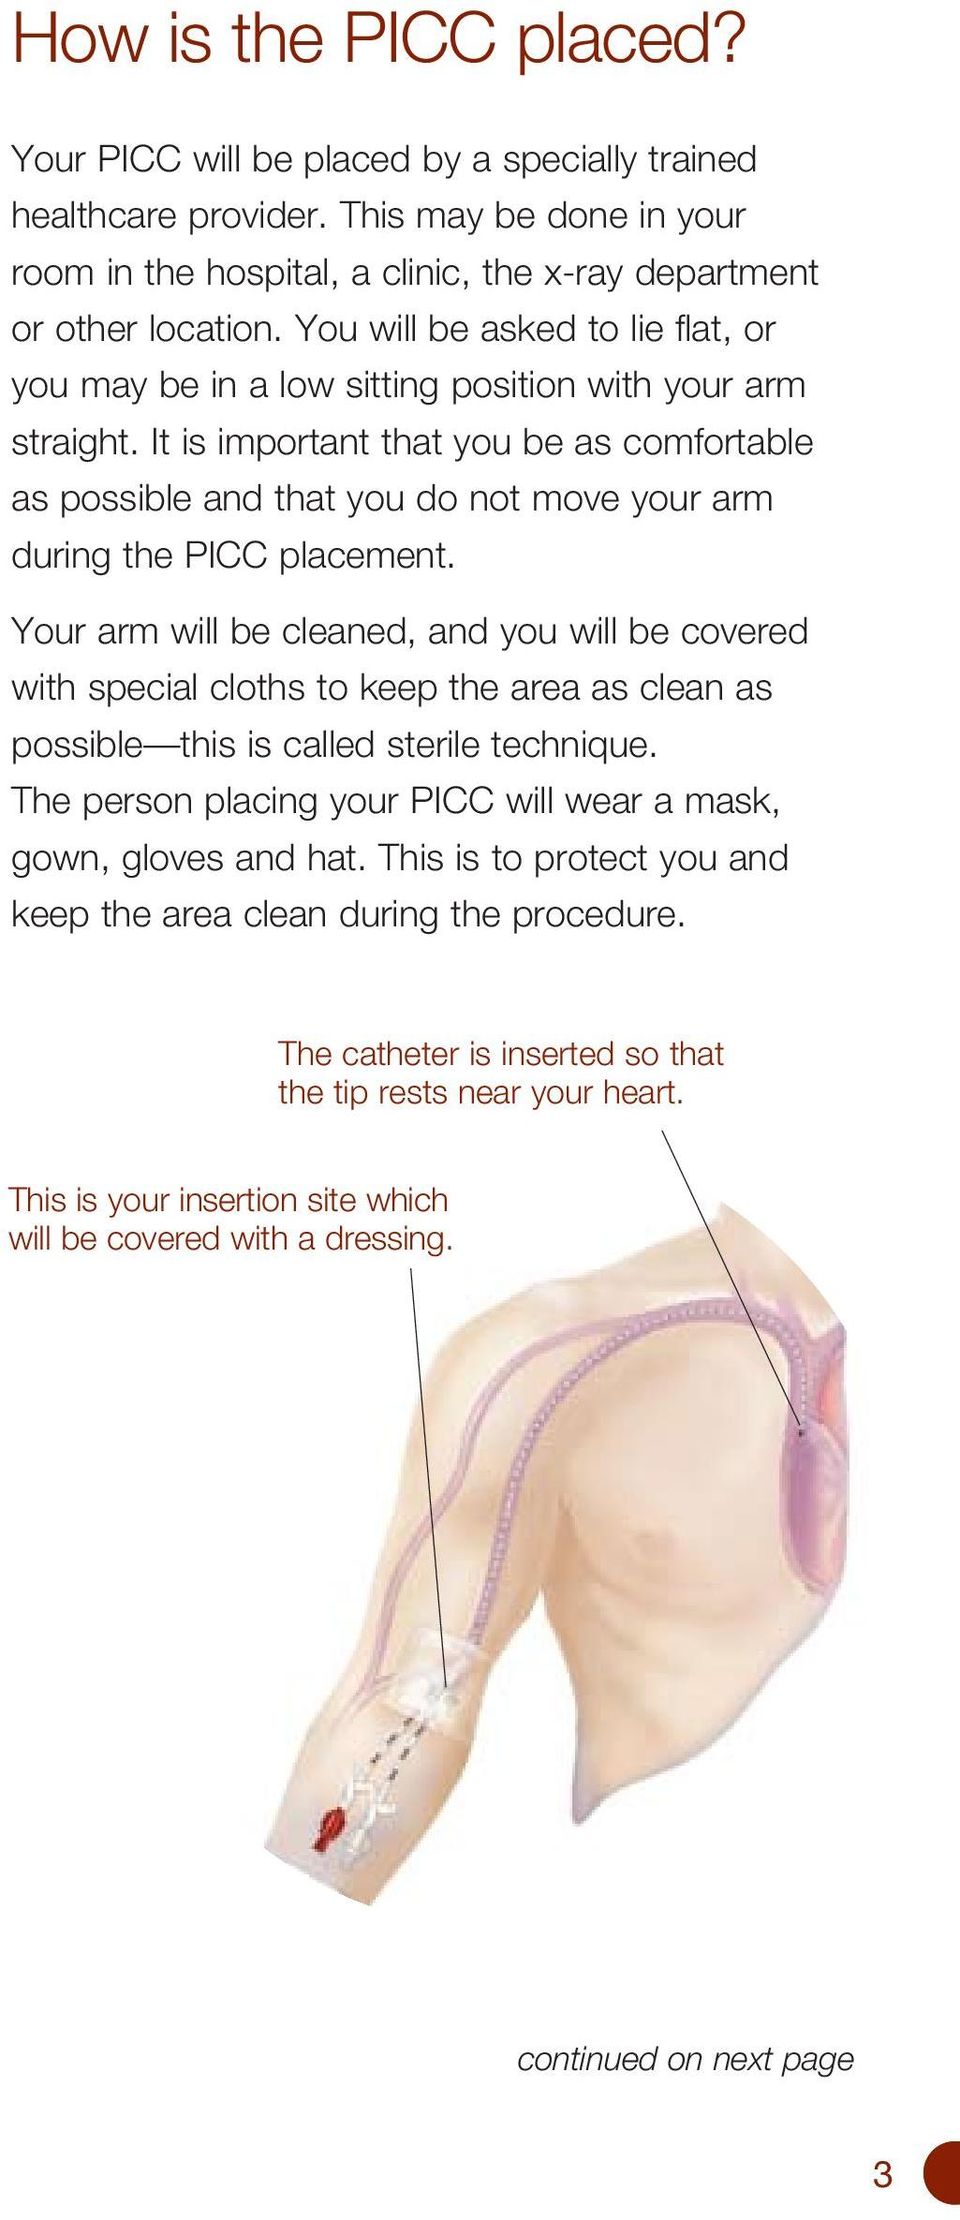 It is important that you be as comfortable as possible and that you do not move your arm during the PICC placement.